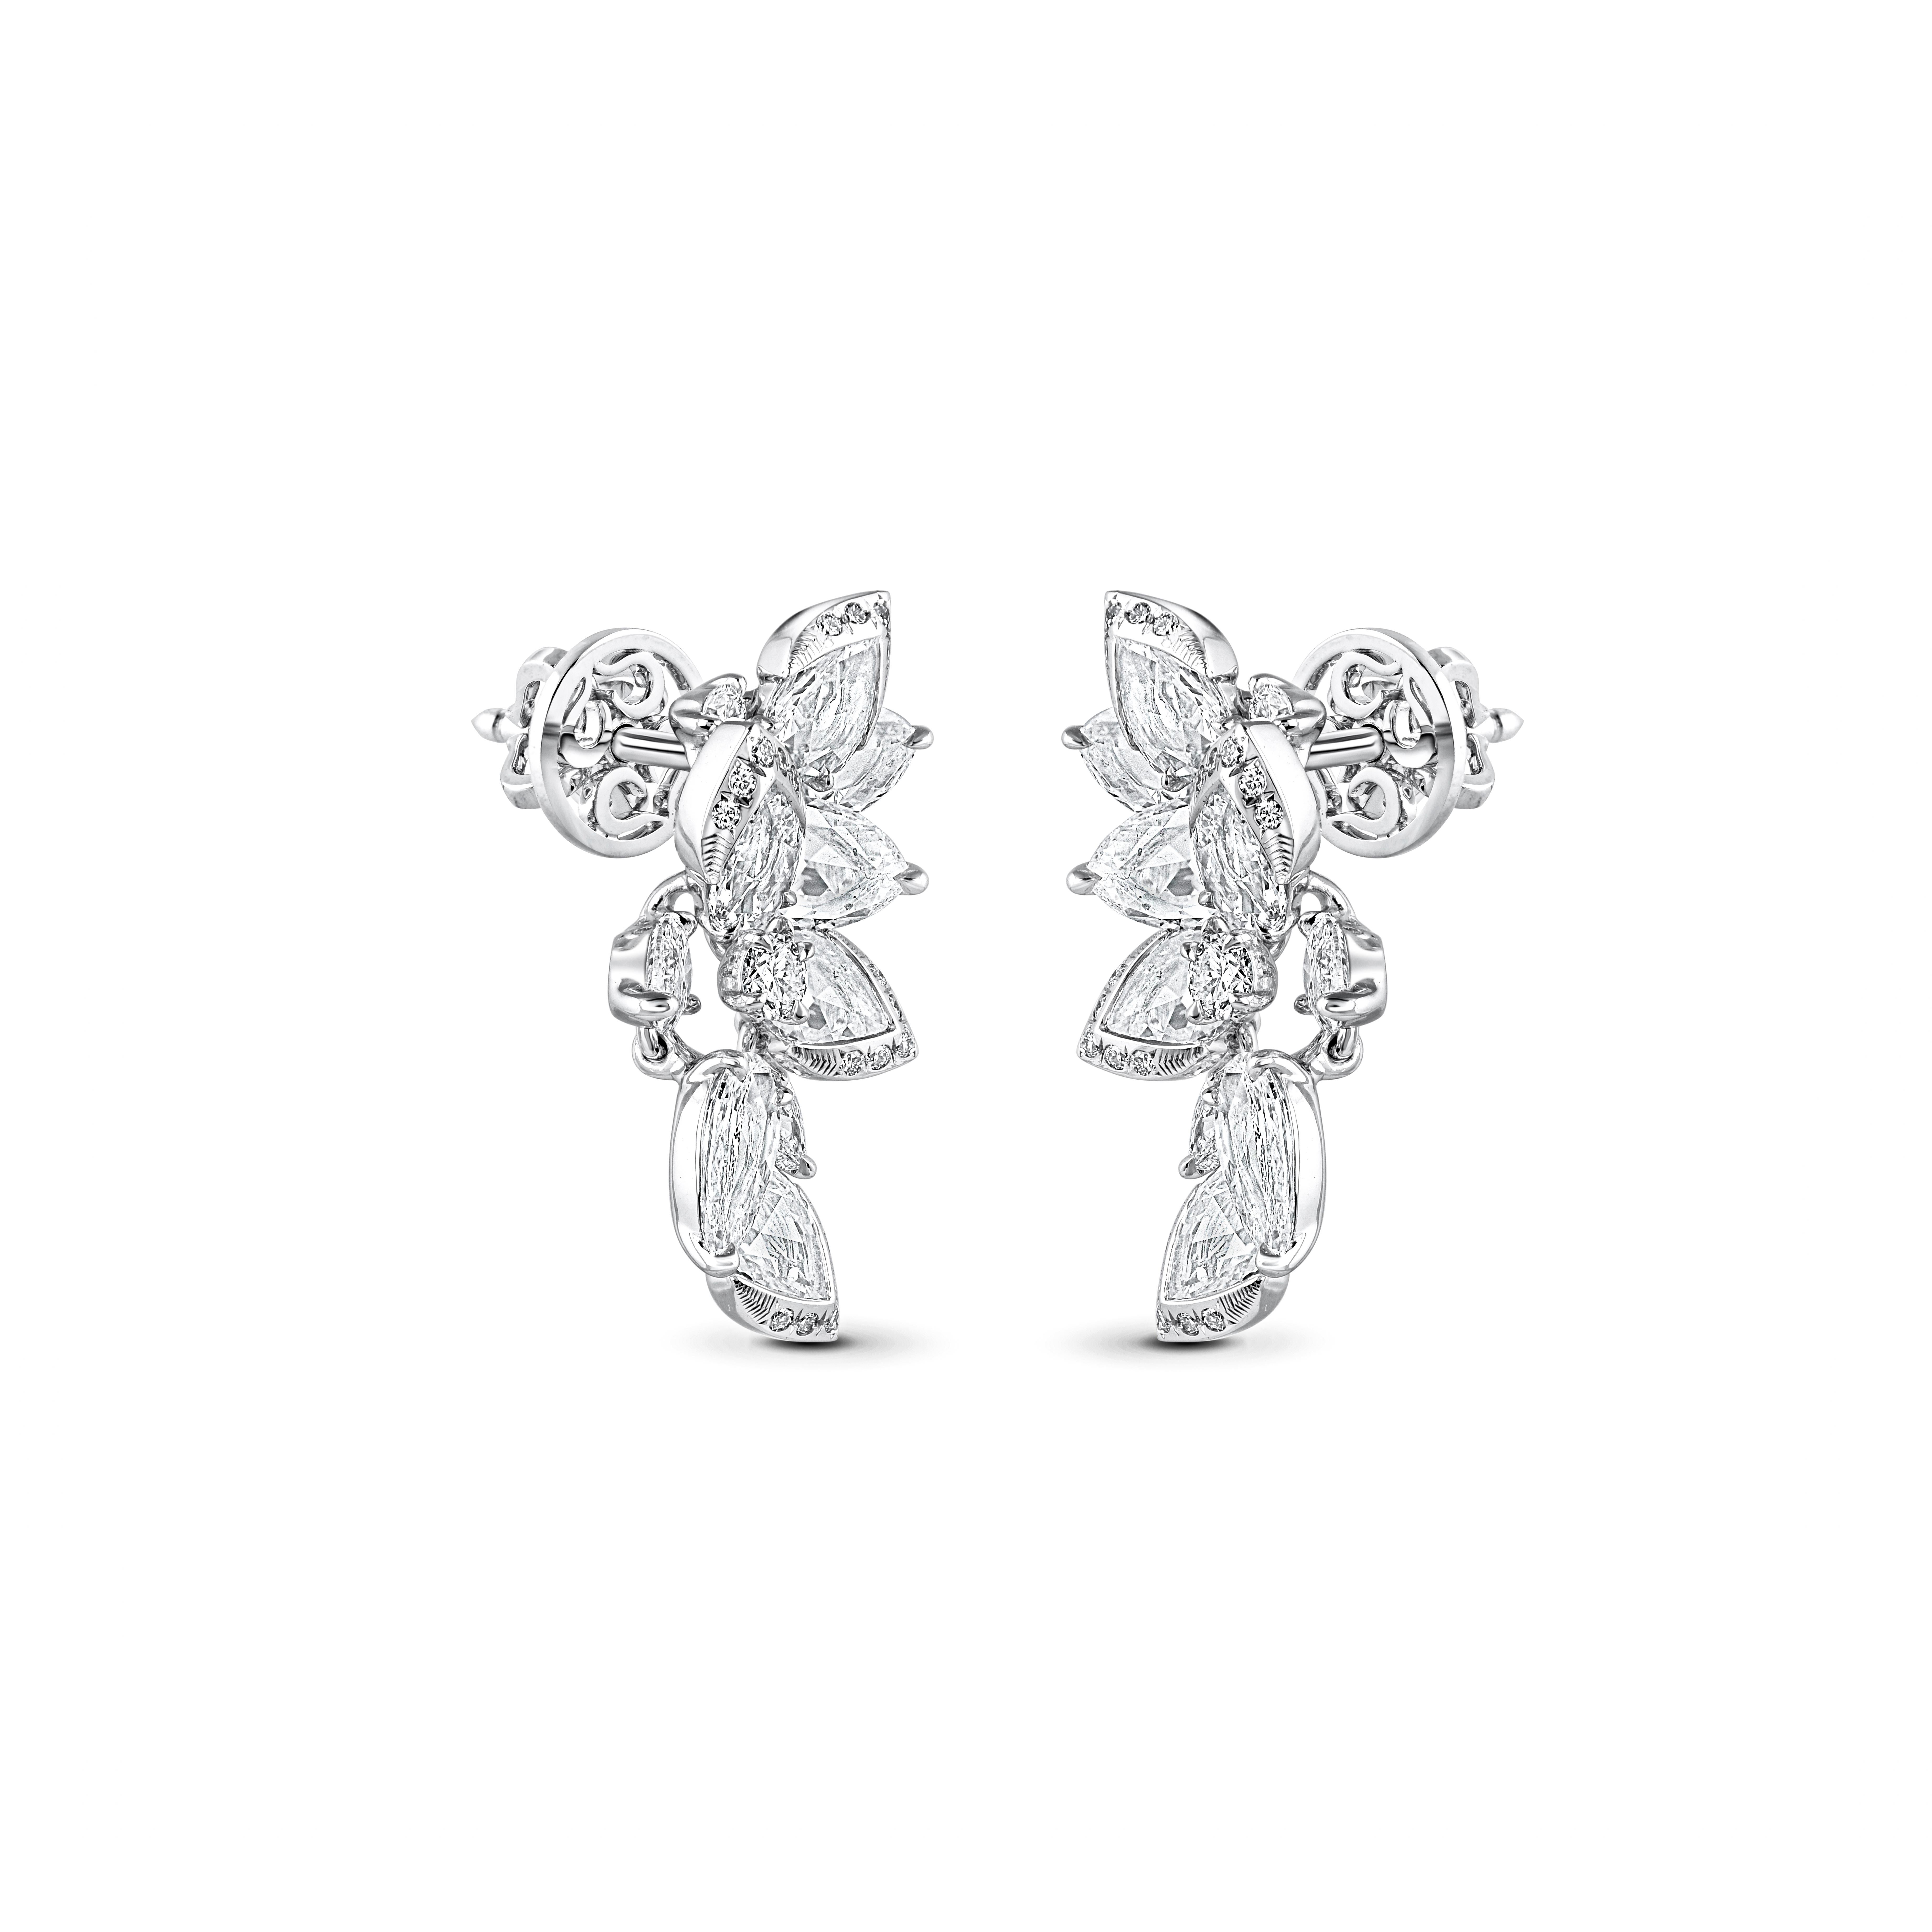 Inspired by the JOY of experiencing a gushing waterfall, these cascade earrings are studded with brilliant and rose cut diamonds dripping delicately. The diamonds are graded as F color and VS2 clarity. The total diamond weight of the earrings is 2